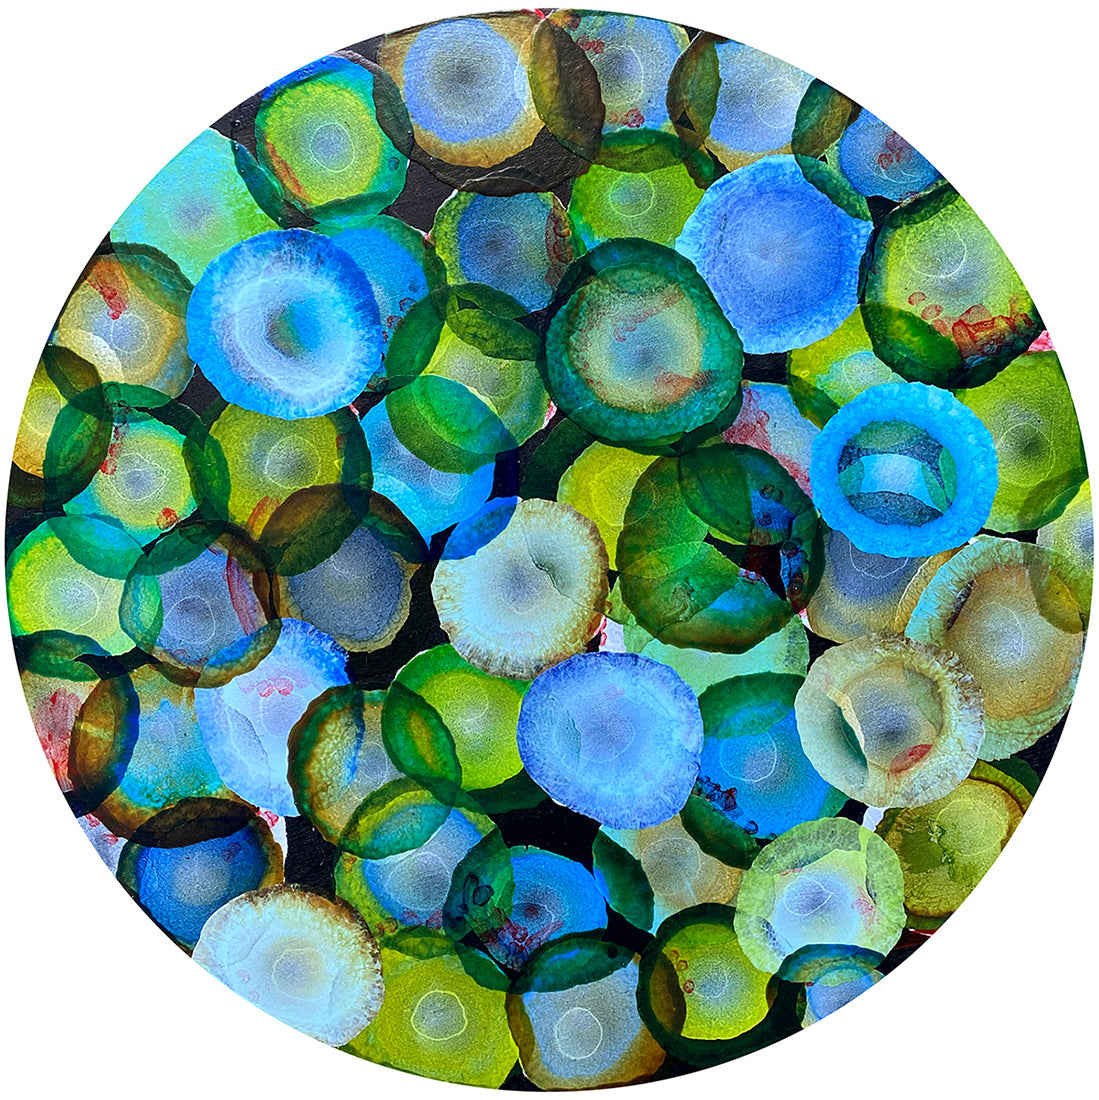 Bio Sphere – Emerald Bloom IV – Abstract Green Painting on Round Wood